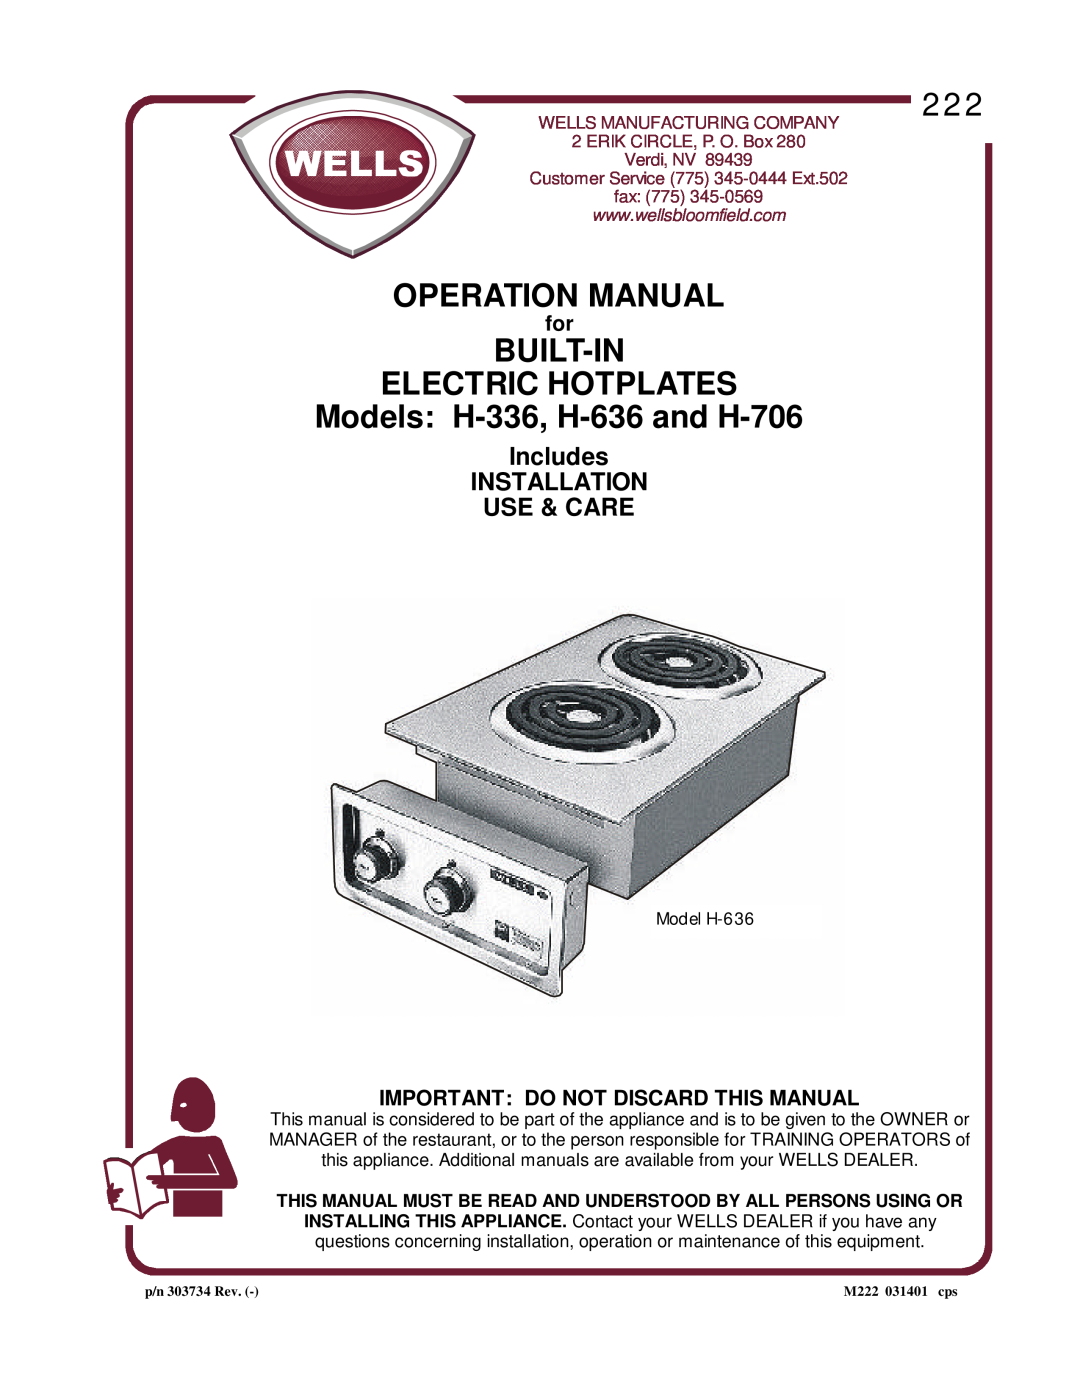 Wells operation manual Built-In Electric Hotplates, Models H-336, H-636and H-706, Includes INSTALLATION USE & CARE 